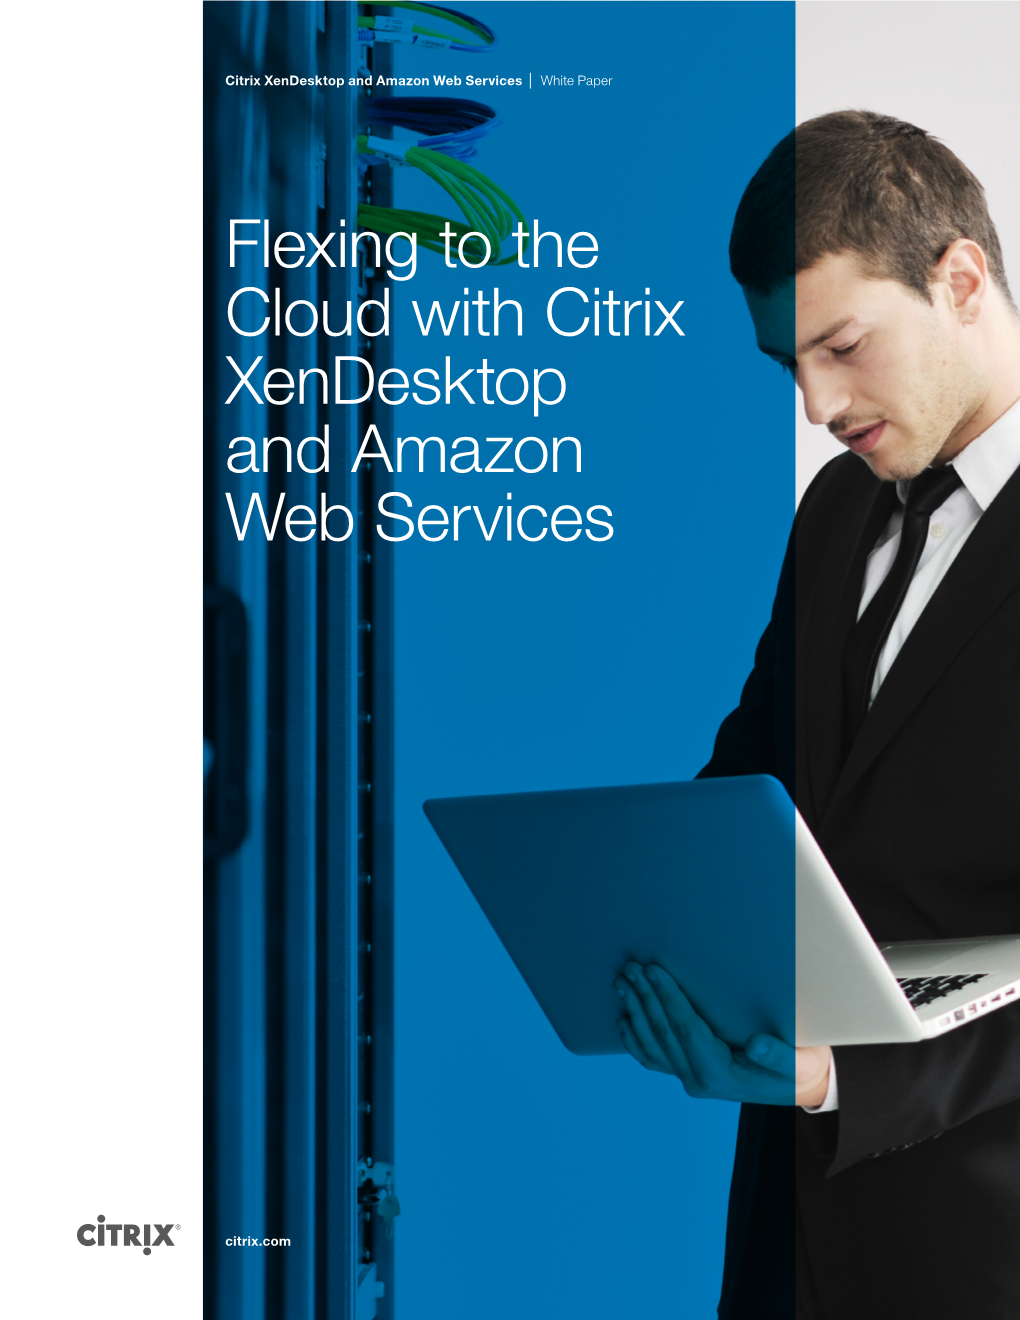 Flexing to the Cloud with Citrix Xendesktop and Amazon Web Services